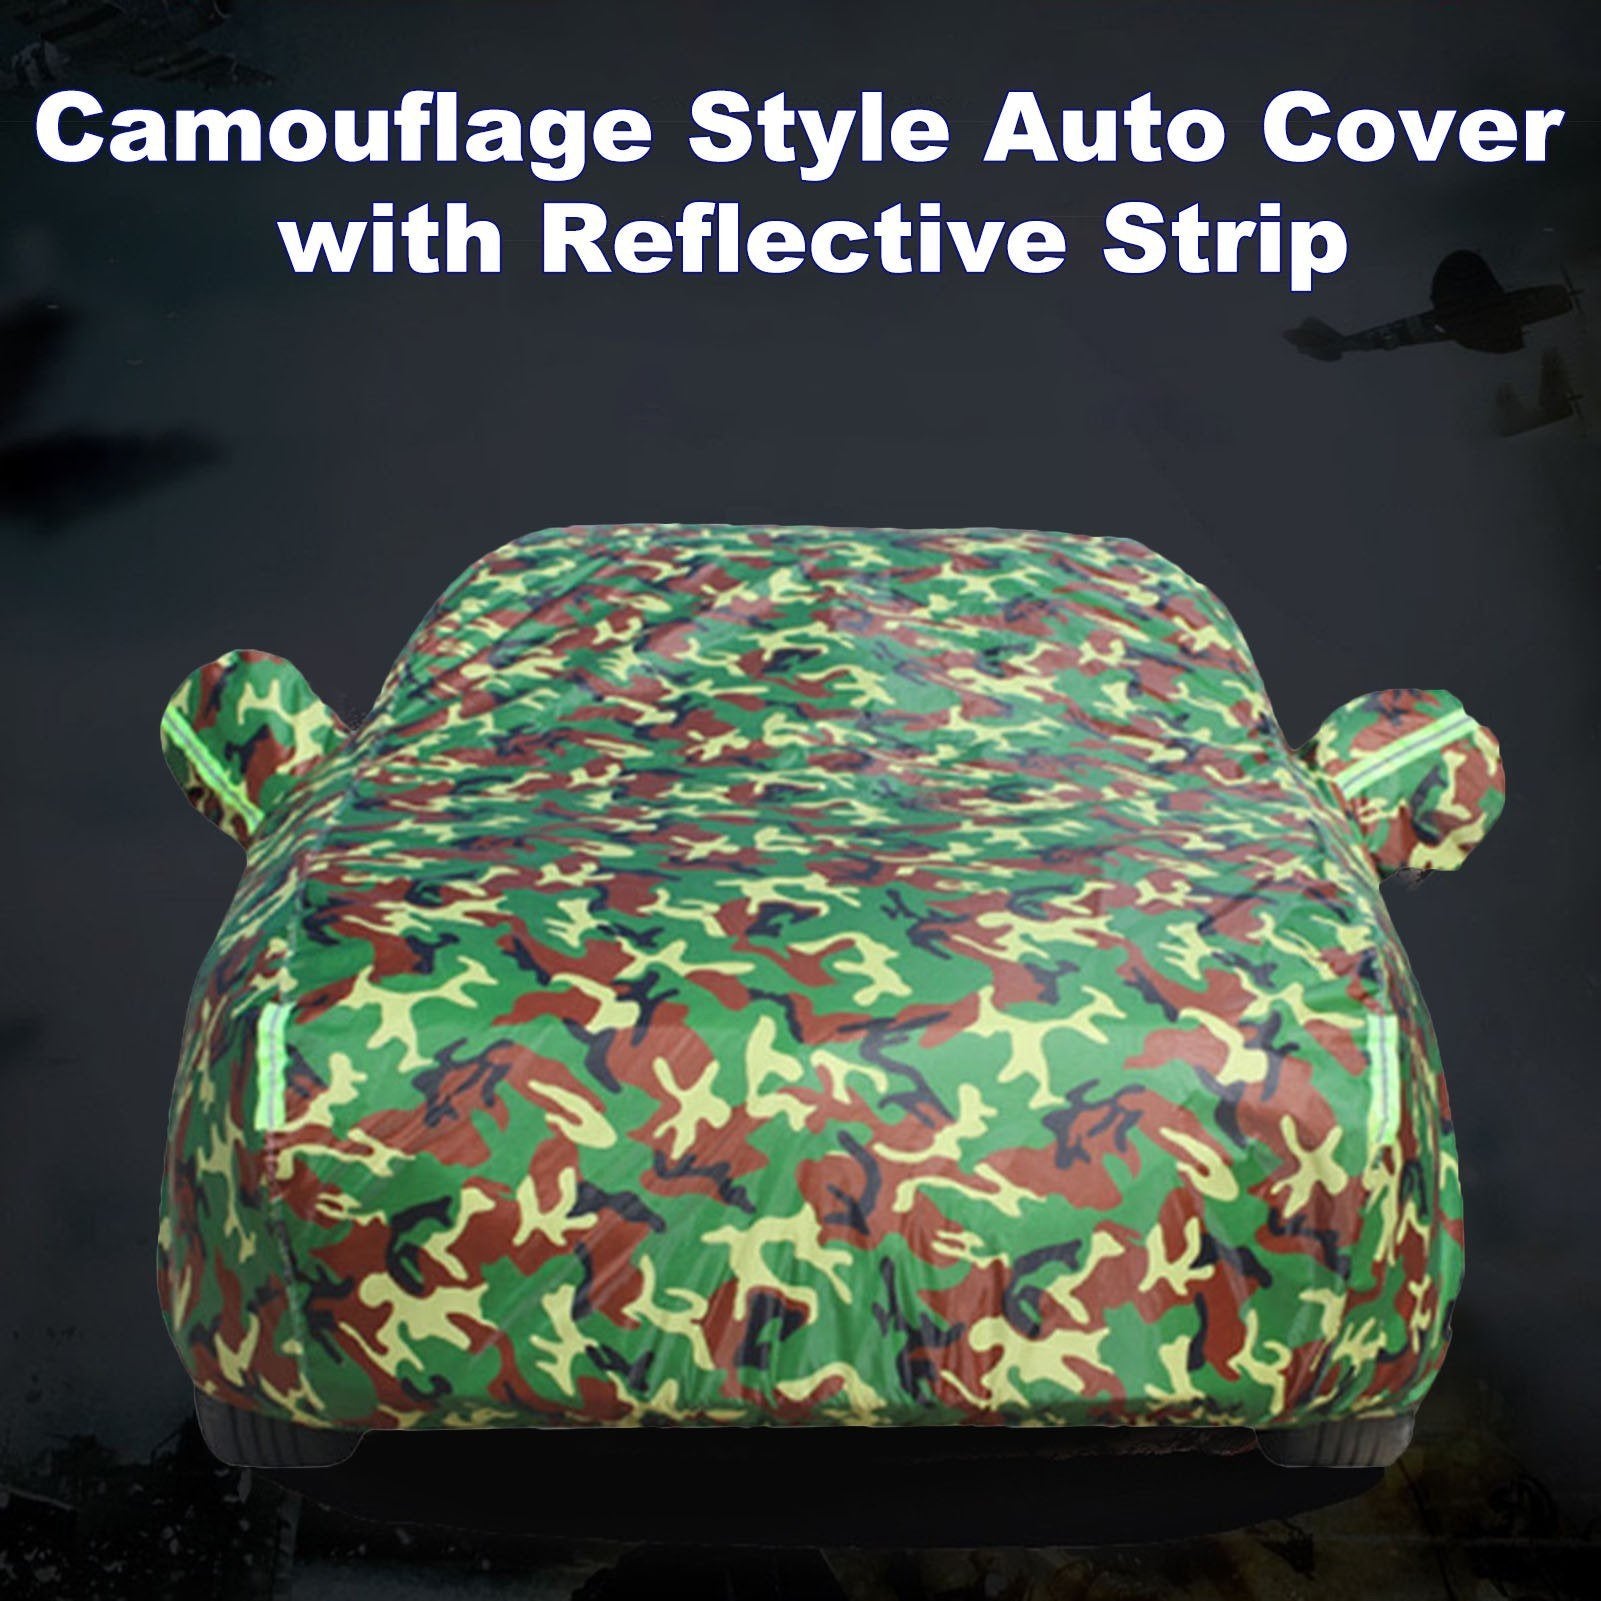 Car Cover All-weather Protection Full Covers with Reflective Strip Camouflage Style Auto Sunscreen